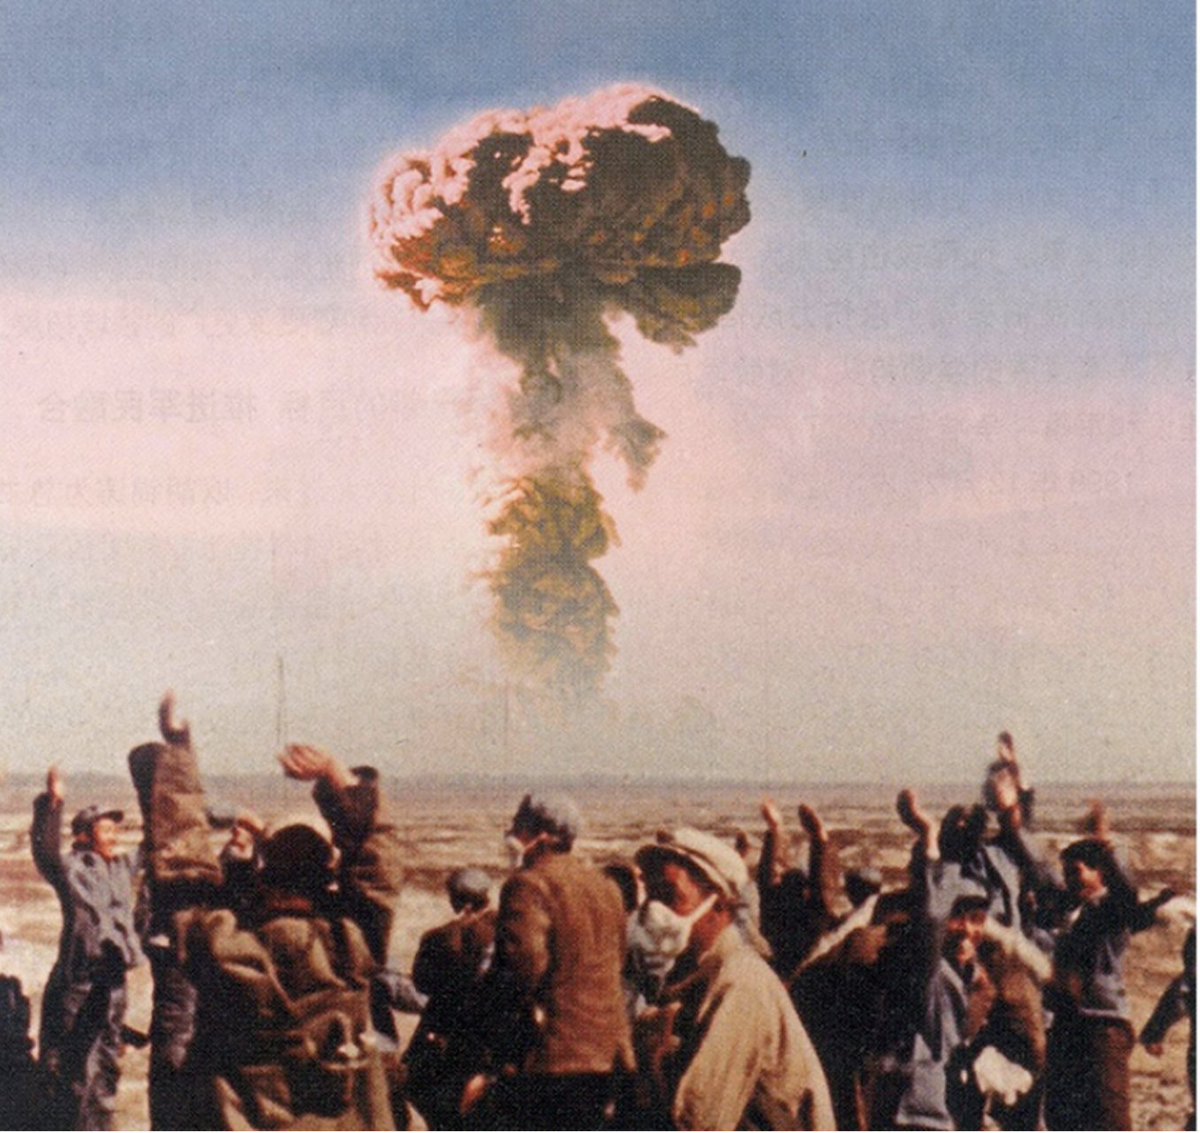 15/ FUN FACT: About the same time, China successfully tested its first nuke. At Lop Nor, China's nuclear testing grounds in Xinjiang, the Chinese gov't builds a subway test line - and nukes it, as they want the Beijing subway to be nuke-proof! (Pic cred:  https://www.scmp.com/news/china/article/1617933/day-china-entered-nuclear-age)